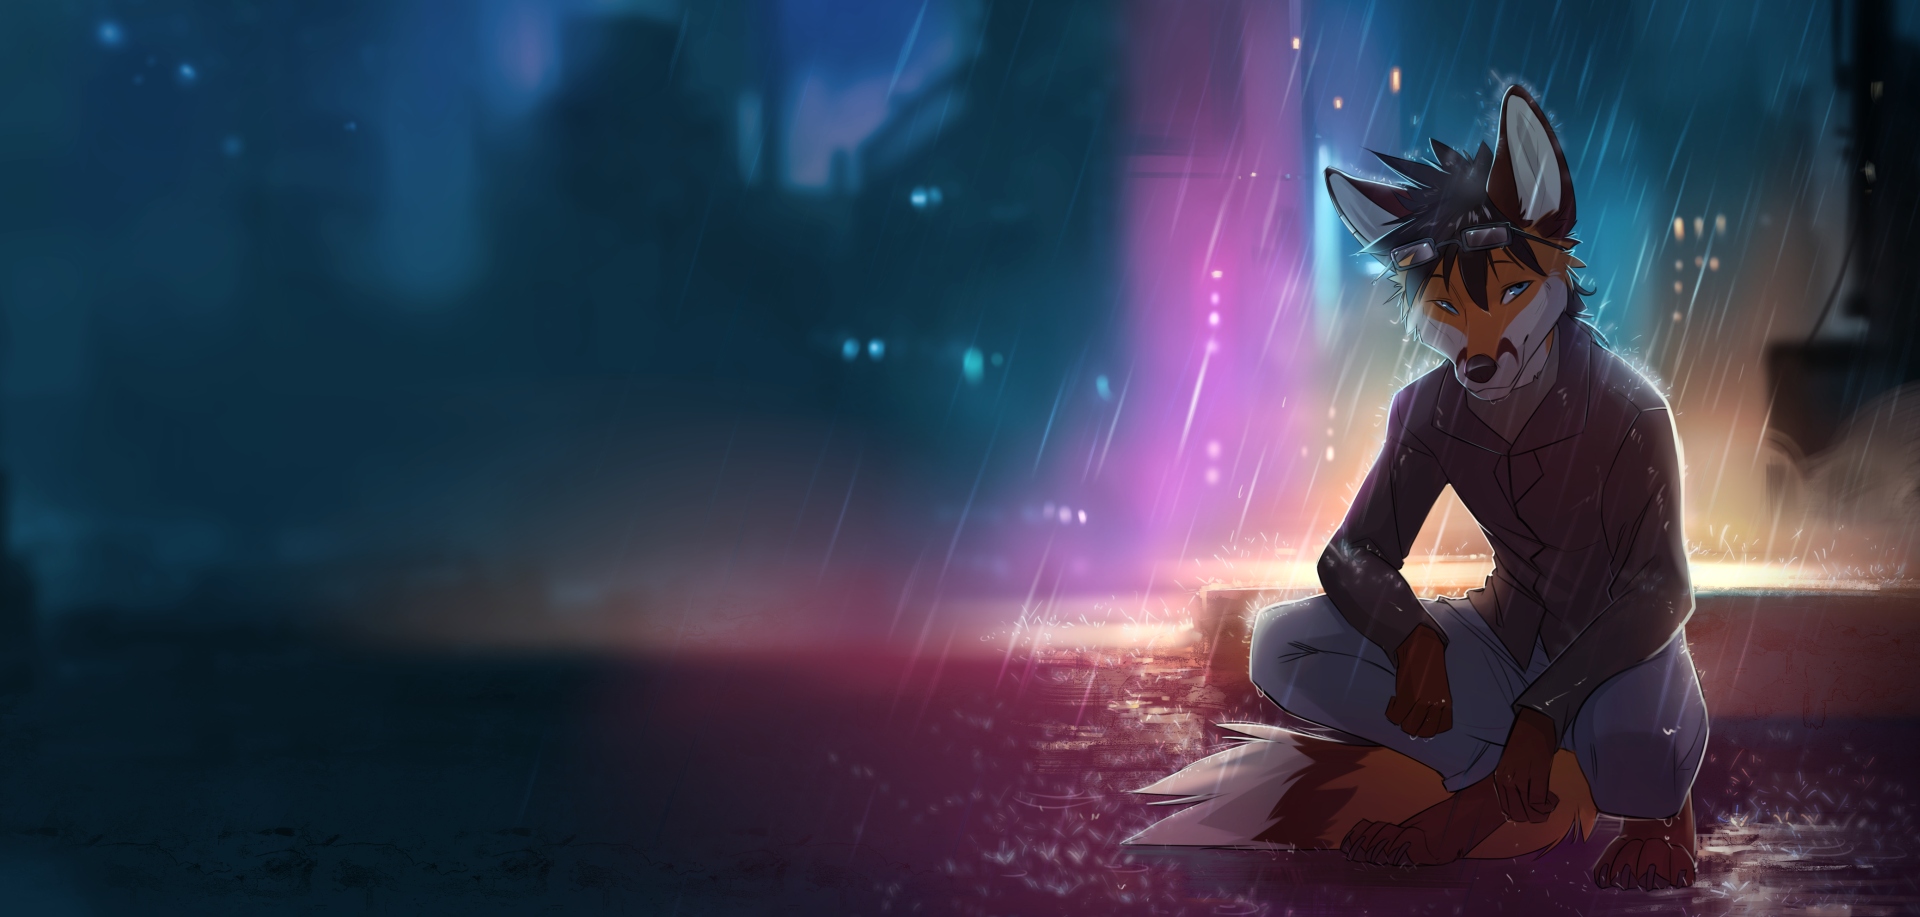 Character: FoxAmoore. Illustration by Orphen Sirius